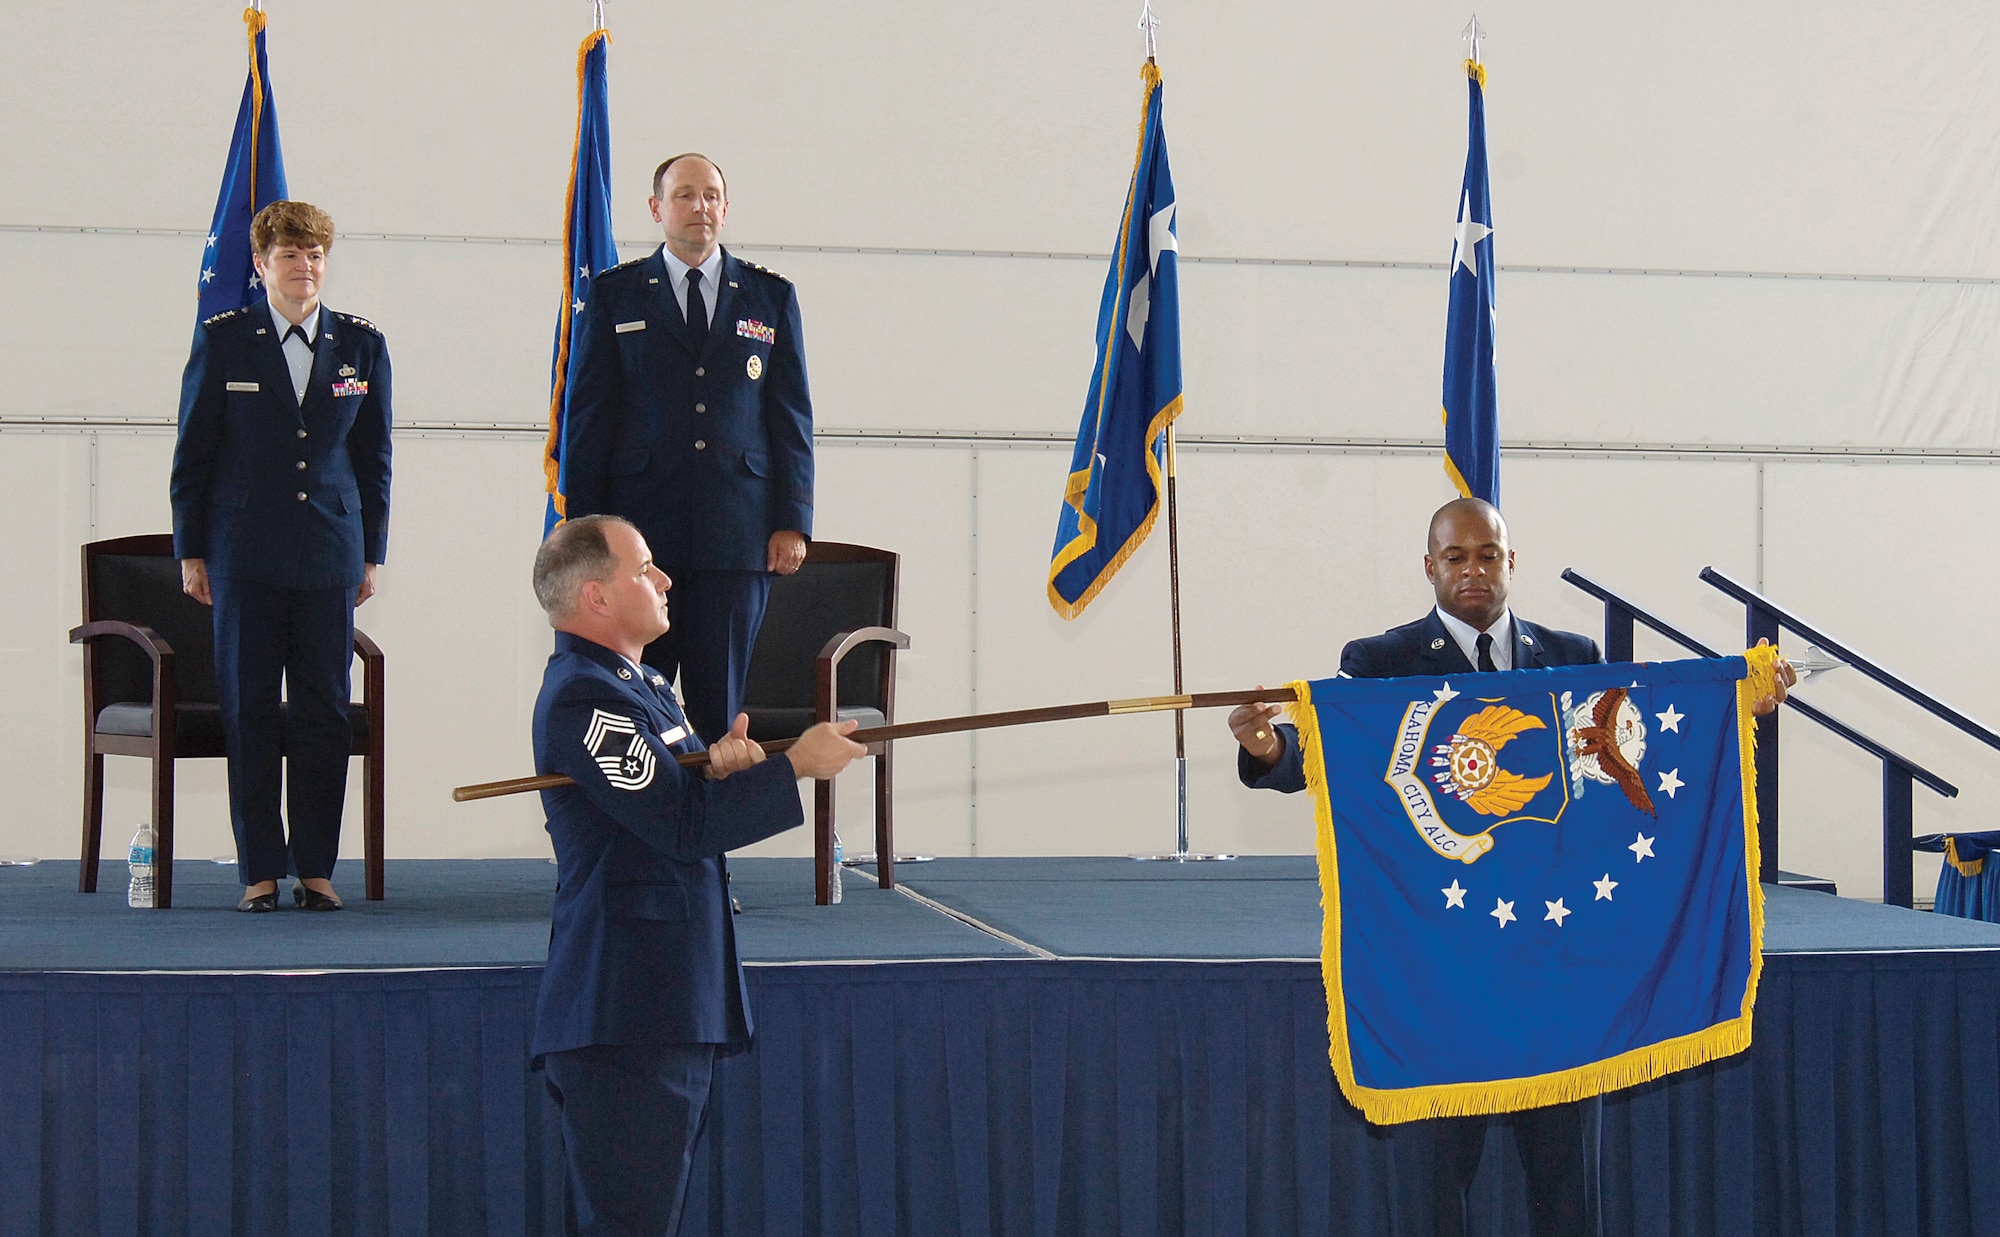 Gen. Janet Wolfenbarger, Air Force Materiel Command commander, and Lt. Gen. Bruce Litchfield, Air Force Sustainment Center commander, look on as Chief Master Sgt. Scott Magoon and Master Sgt. Albert Bryant, both from the 76th Aircraft Maintenance Group, unfurl the Oklahoma City Air Logistics Complex flag during the Air Force Sustainment Center Activation Ceremony at Tinker Air Force Base July 10. (U.S. Air Force photo/Margo Wright)